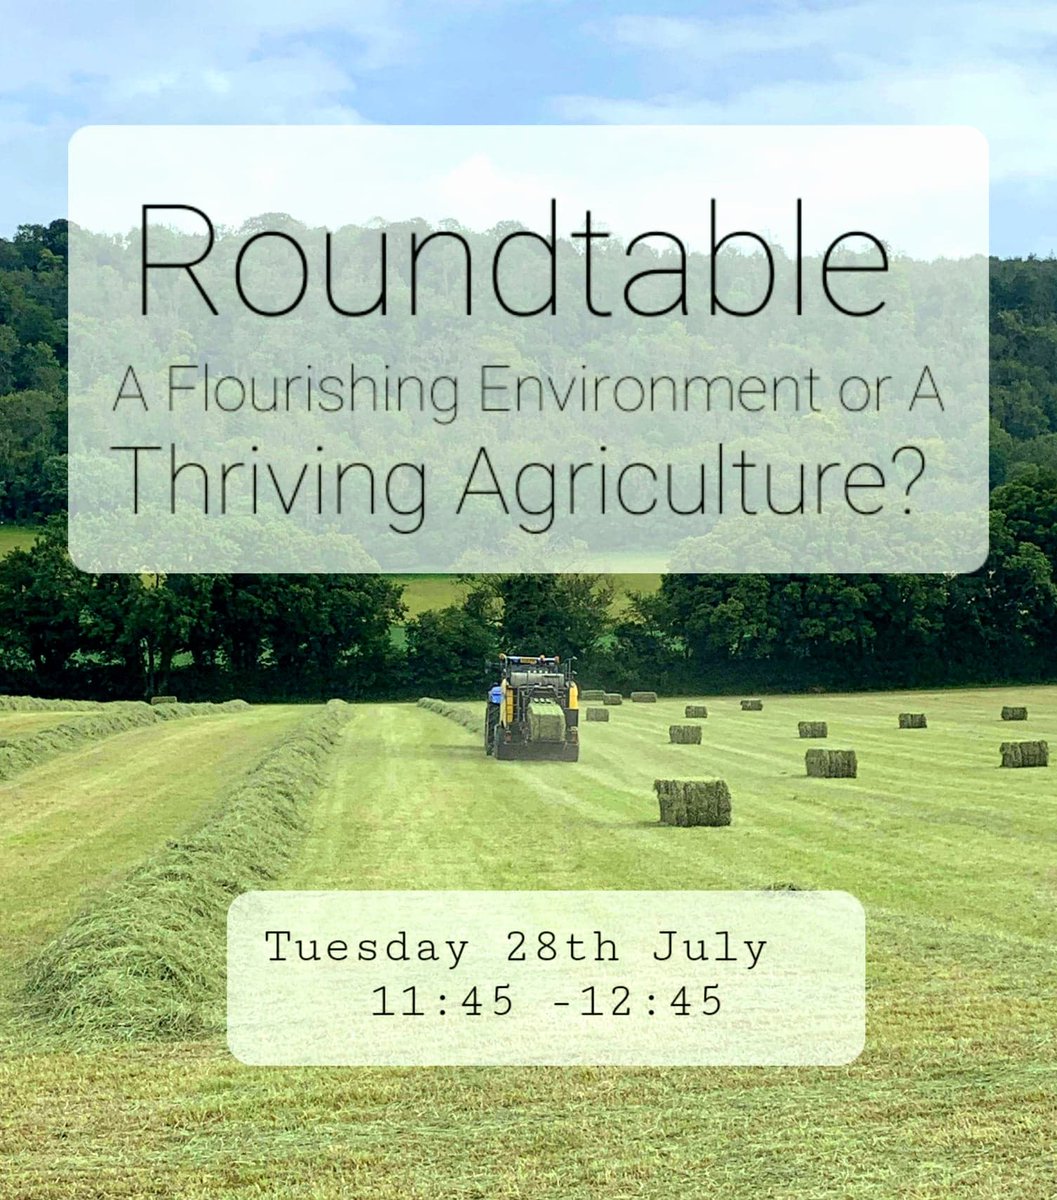 We have an excellent topical roundtable coming up on 
TUES 28th July 
Debating the increasing pressures of environment on food production.

Very topical as we start the change from #CommonAgriculturalPolicy to #EnvironmentalLandManagement 

Register: lnkd.in/d7aXvP